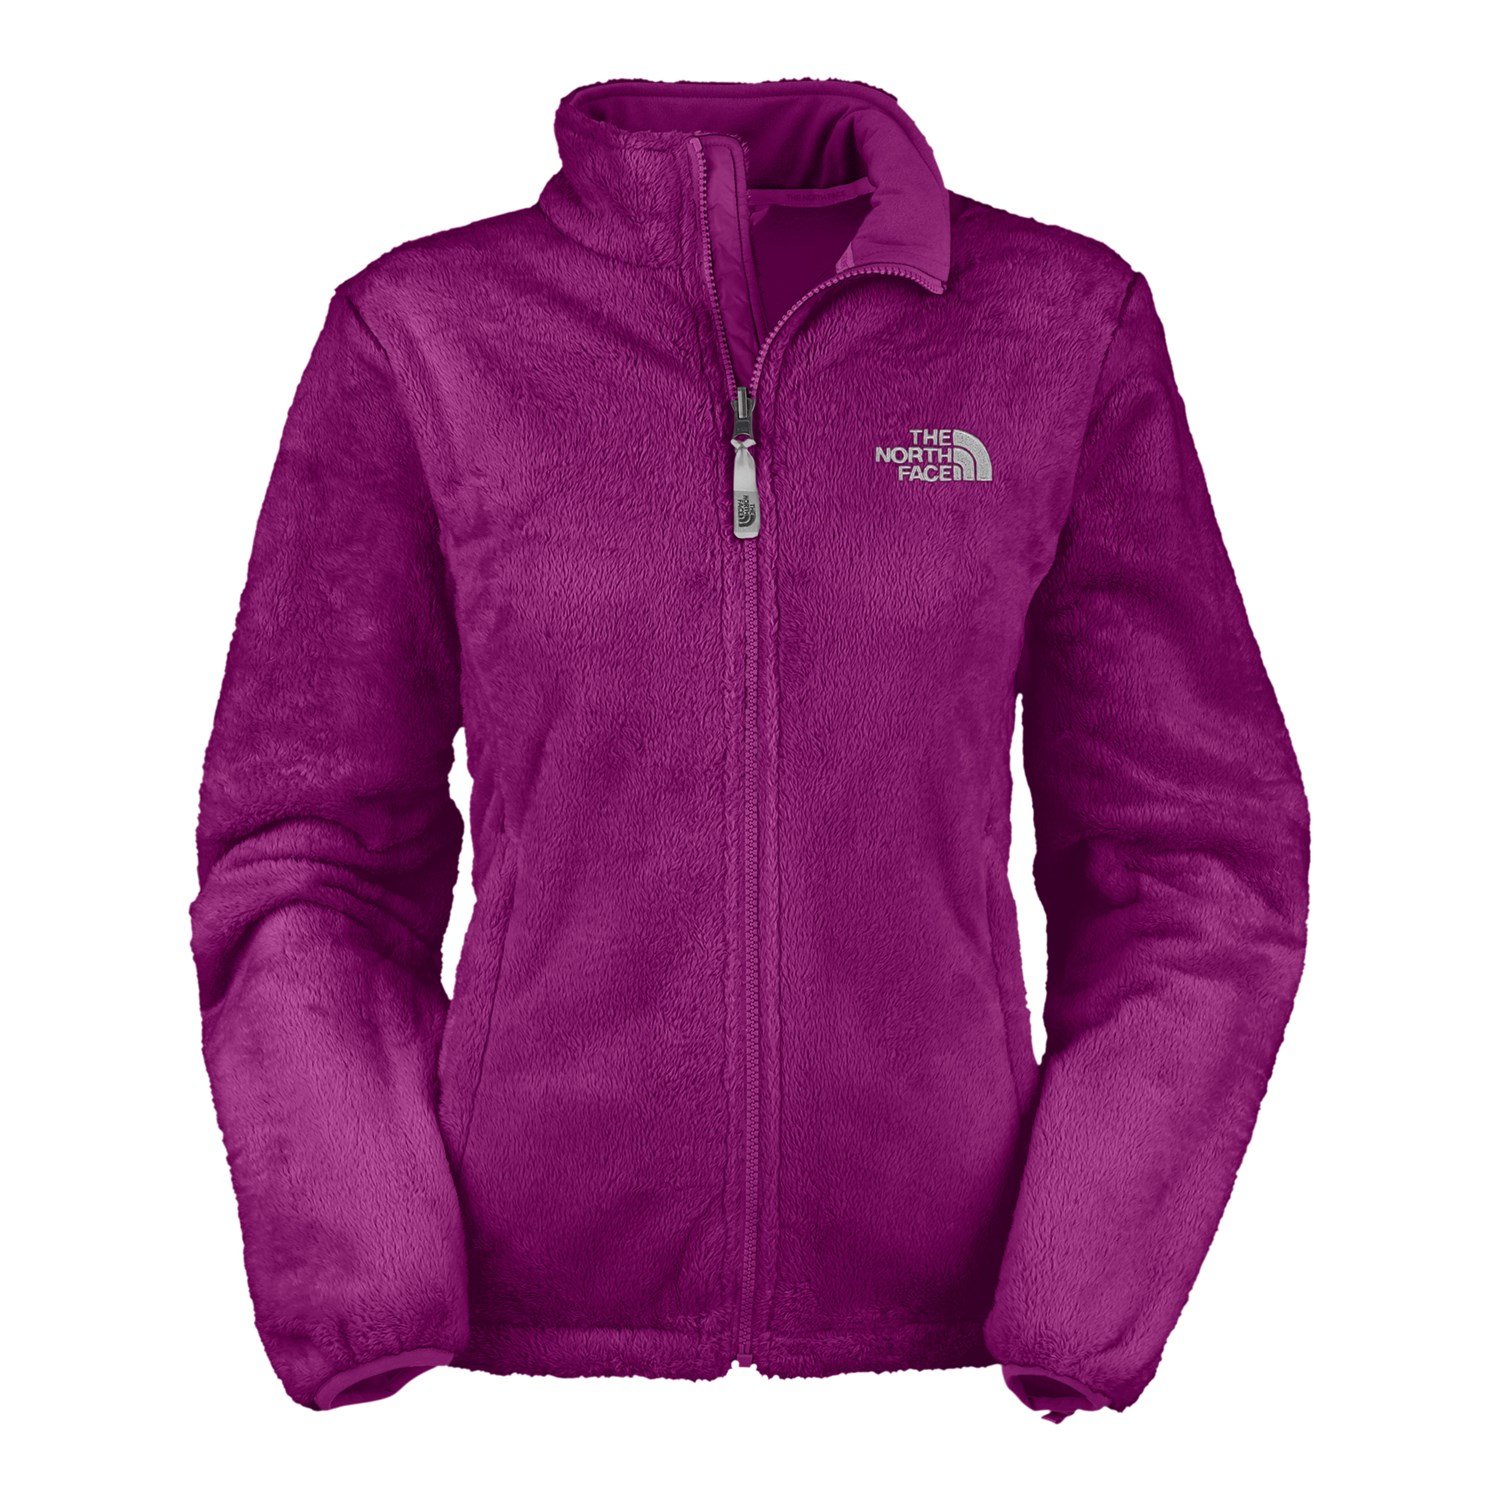 The North Face Osito Jacket - Gem